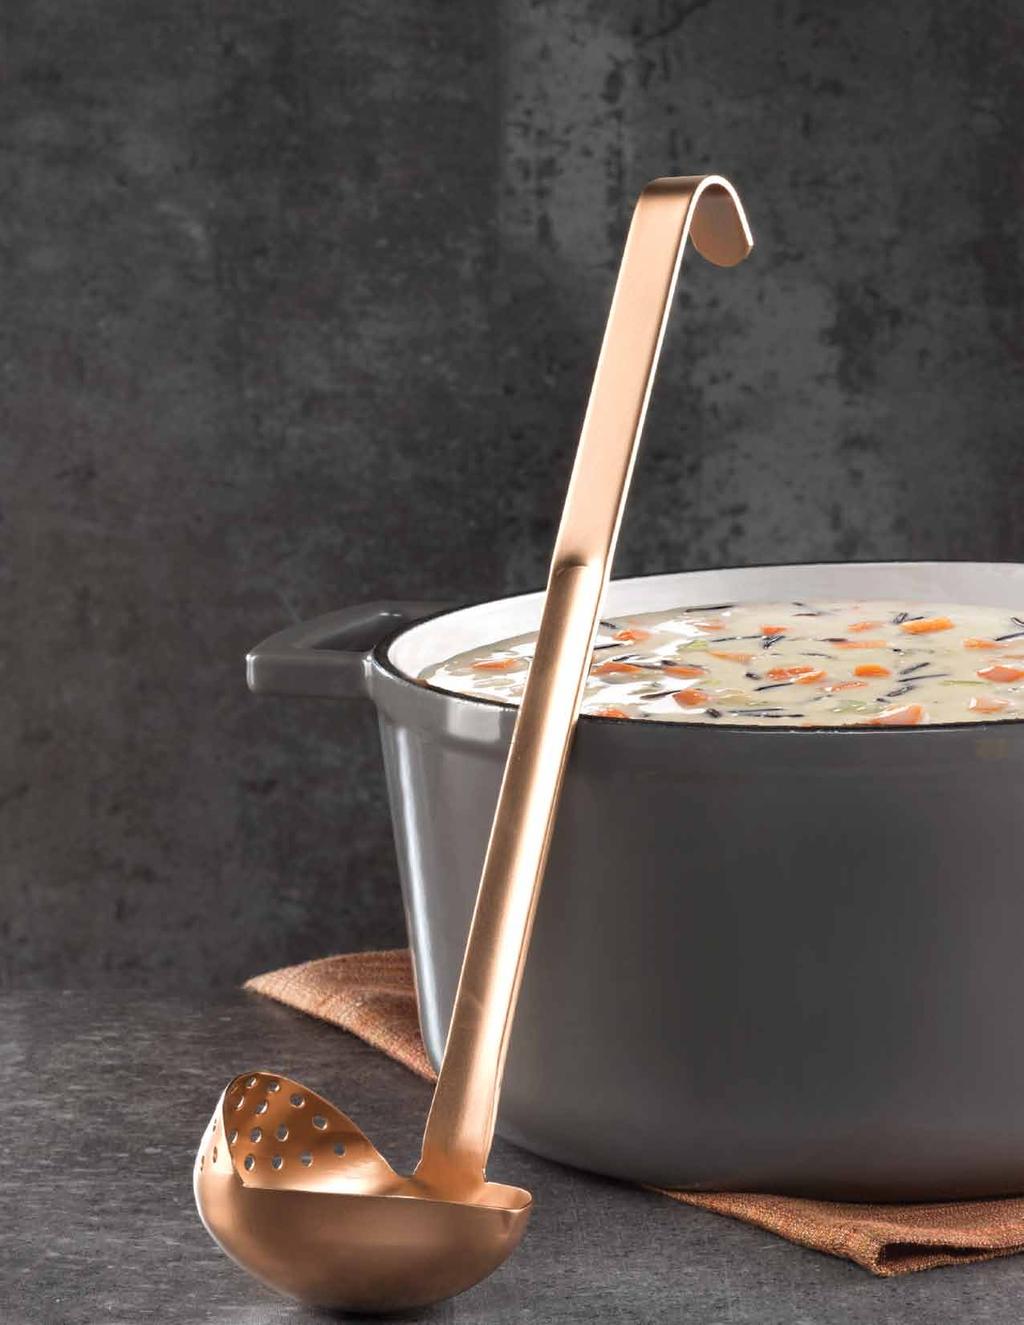 COPPER kitchen essentials that make a statement! scoop, strain and pour soups, stock, Vegetables & more! larger family size serves eight.